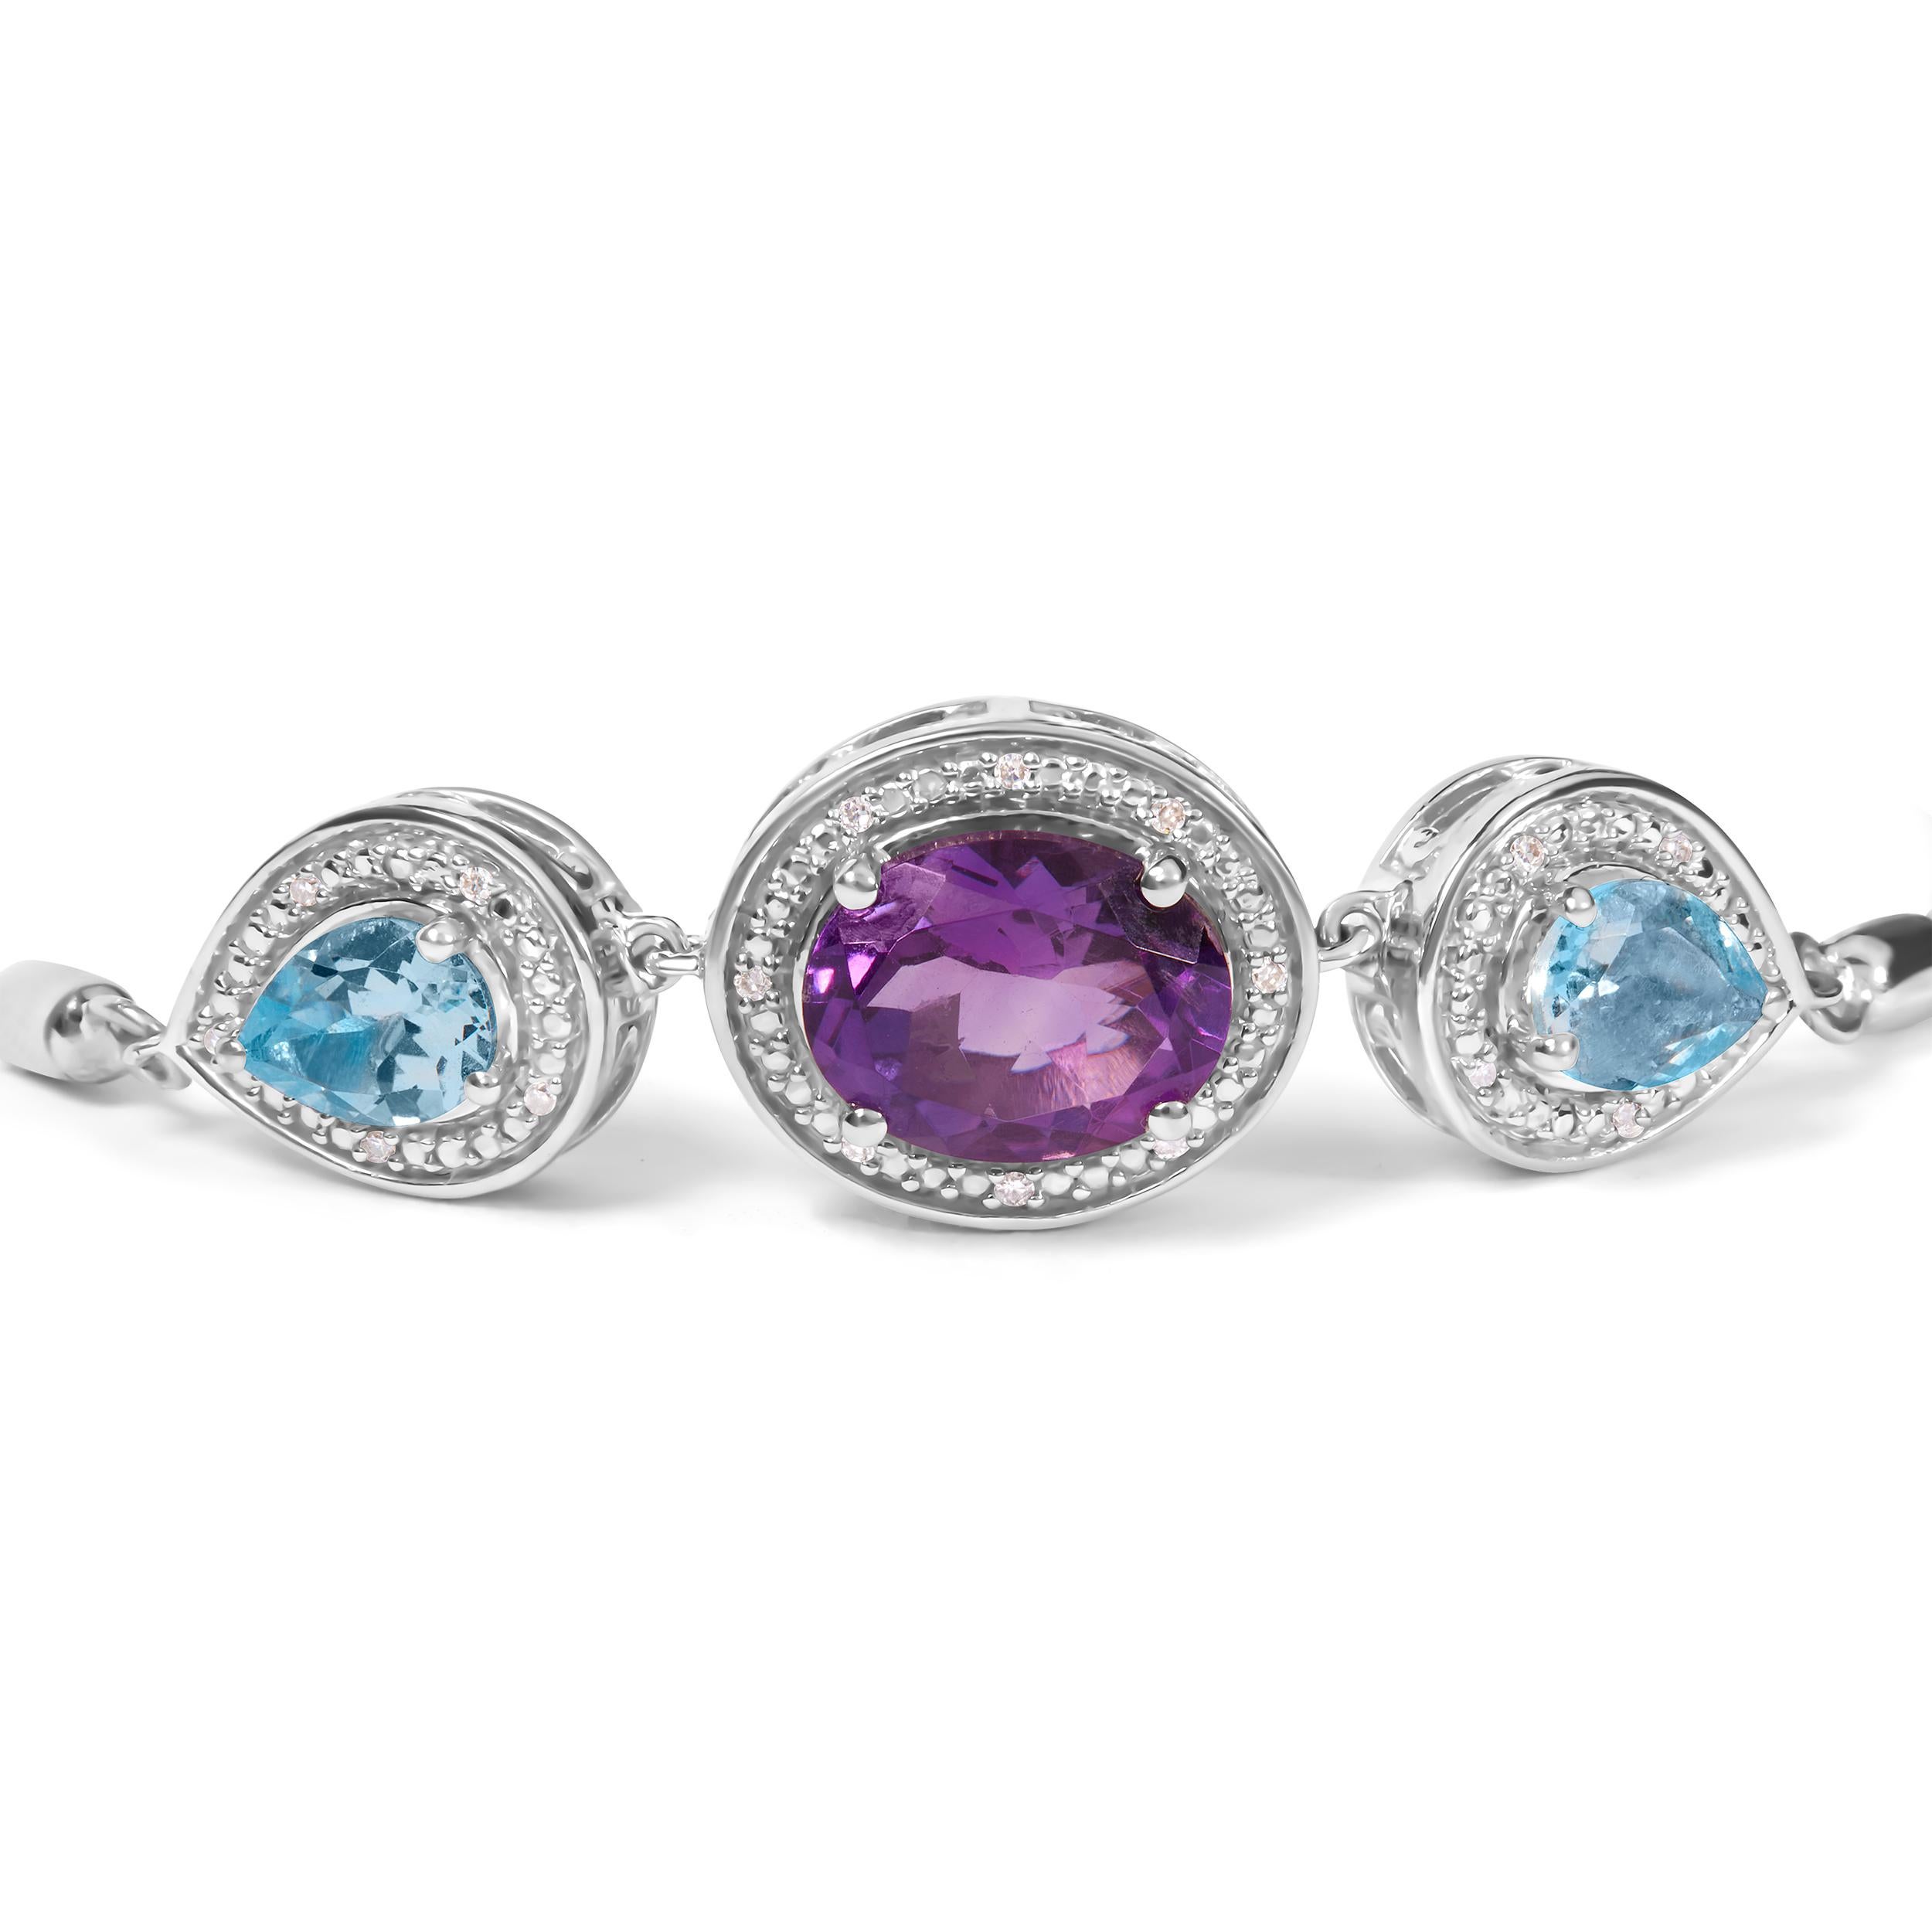 This .925 Sterling Silver Lariat Bolo Bracelet is a luxurious piece that's perfect for any occasion. Adorned with three stunning gemstones, including a dazzling 10x8mm oval-cut purple amethyst and two pear-cut blue topaz, this bracelet is the